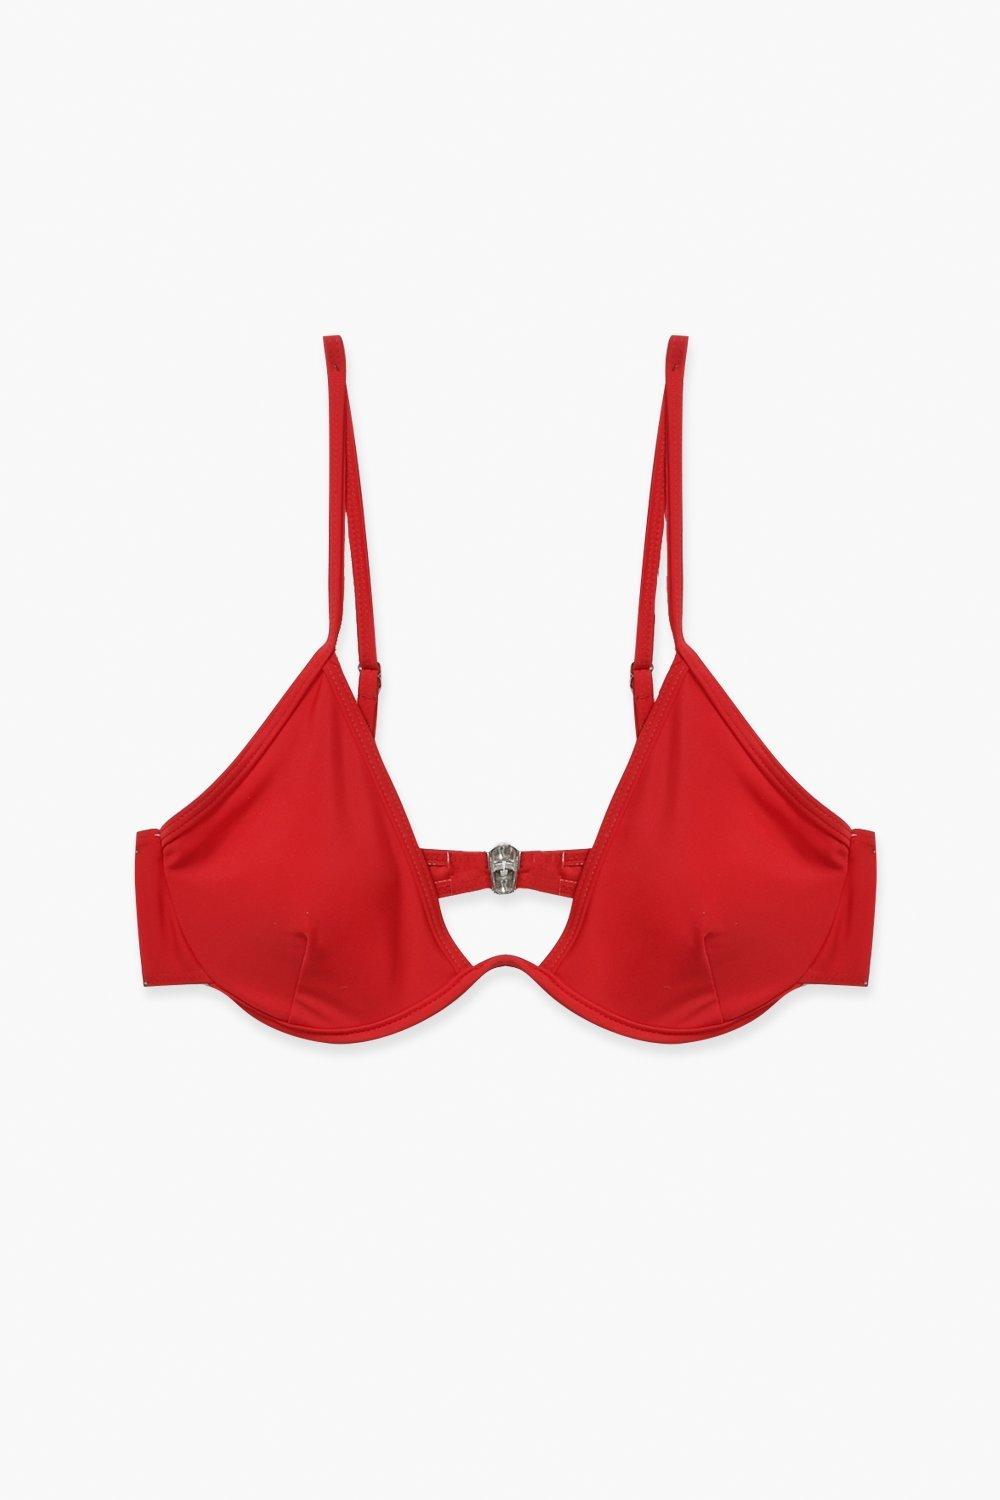 Boohoo Essentials Fuller Bust Petrol Womens Bikini Top – Stockpoint Apparel  Outlet